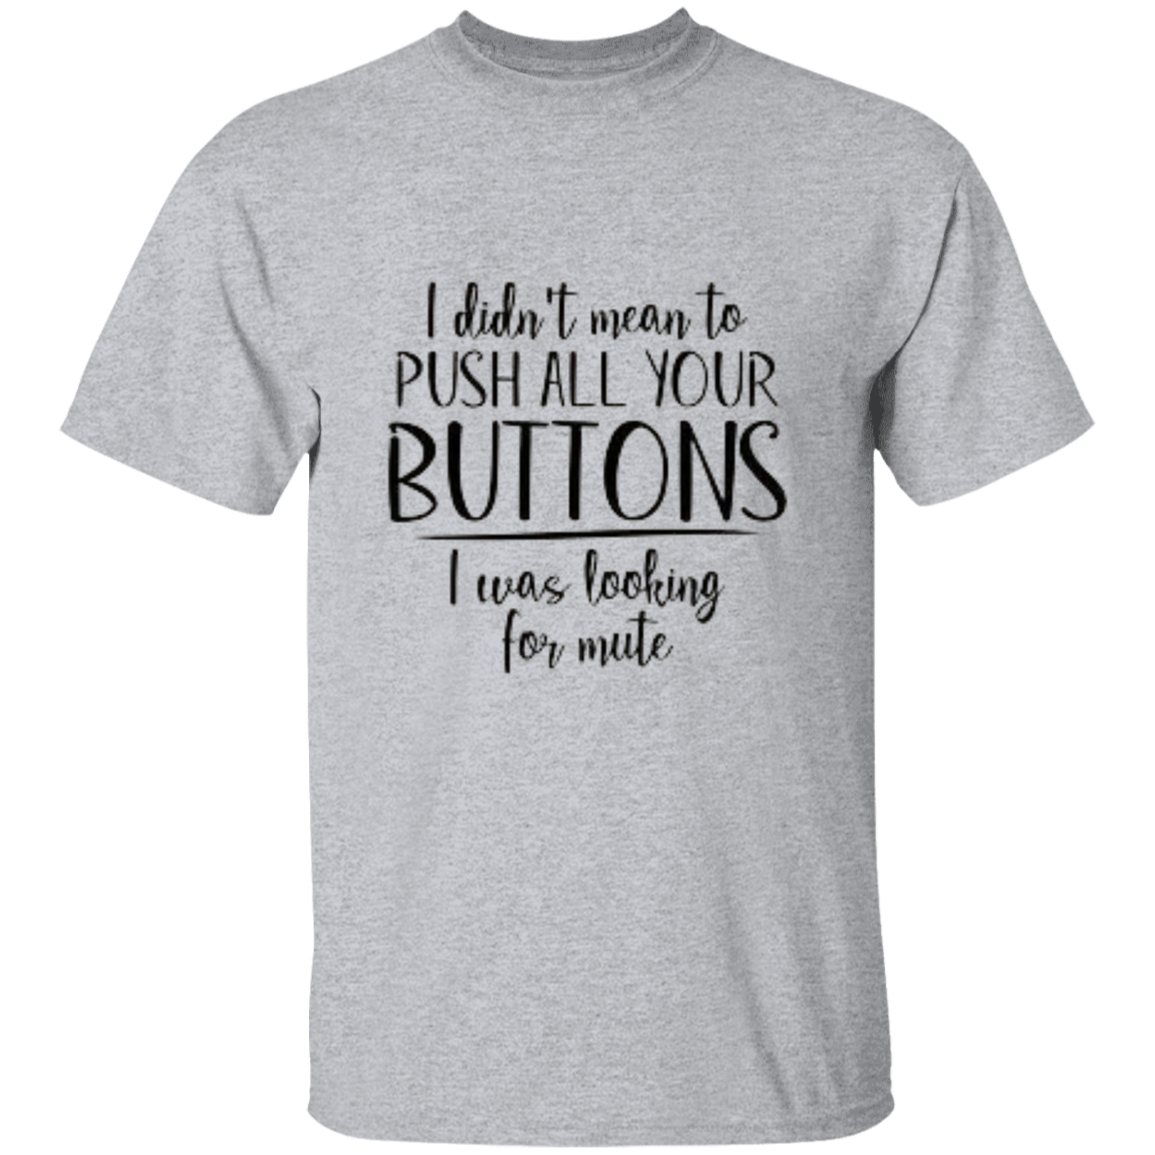 I Didn't Mean To Push All Your Buttons 5.3 oz. T-Shirt